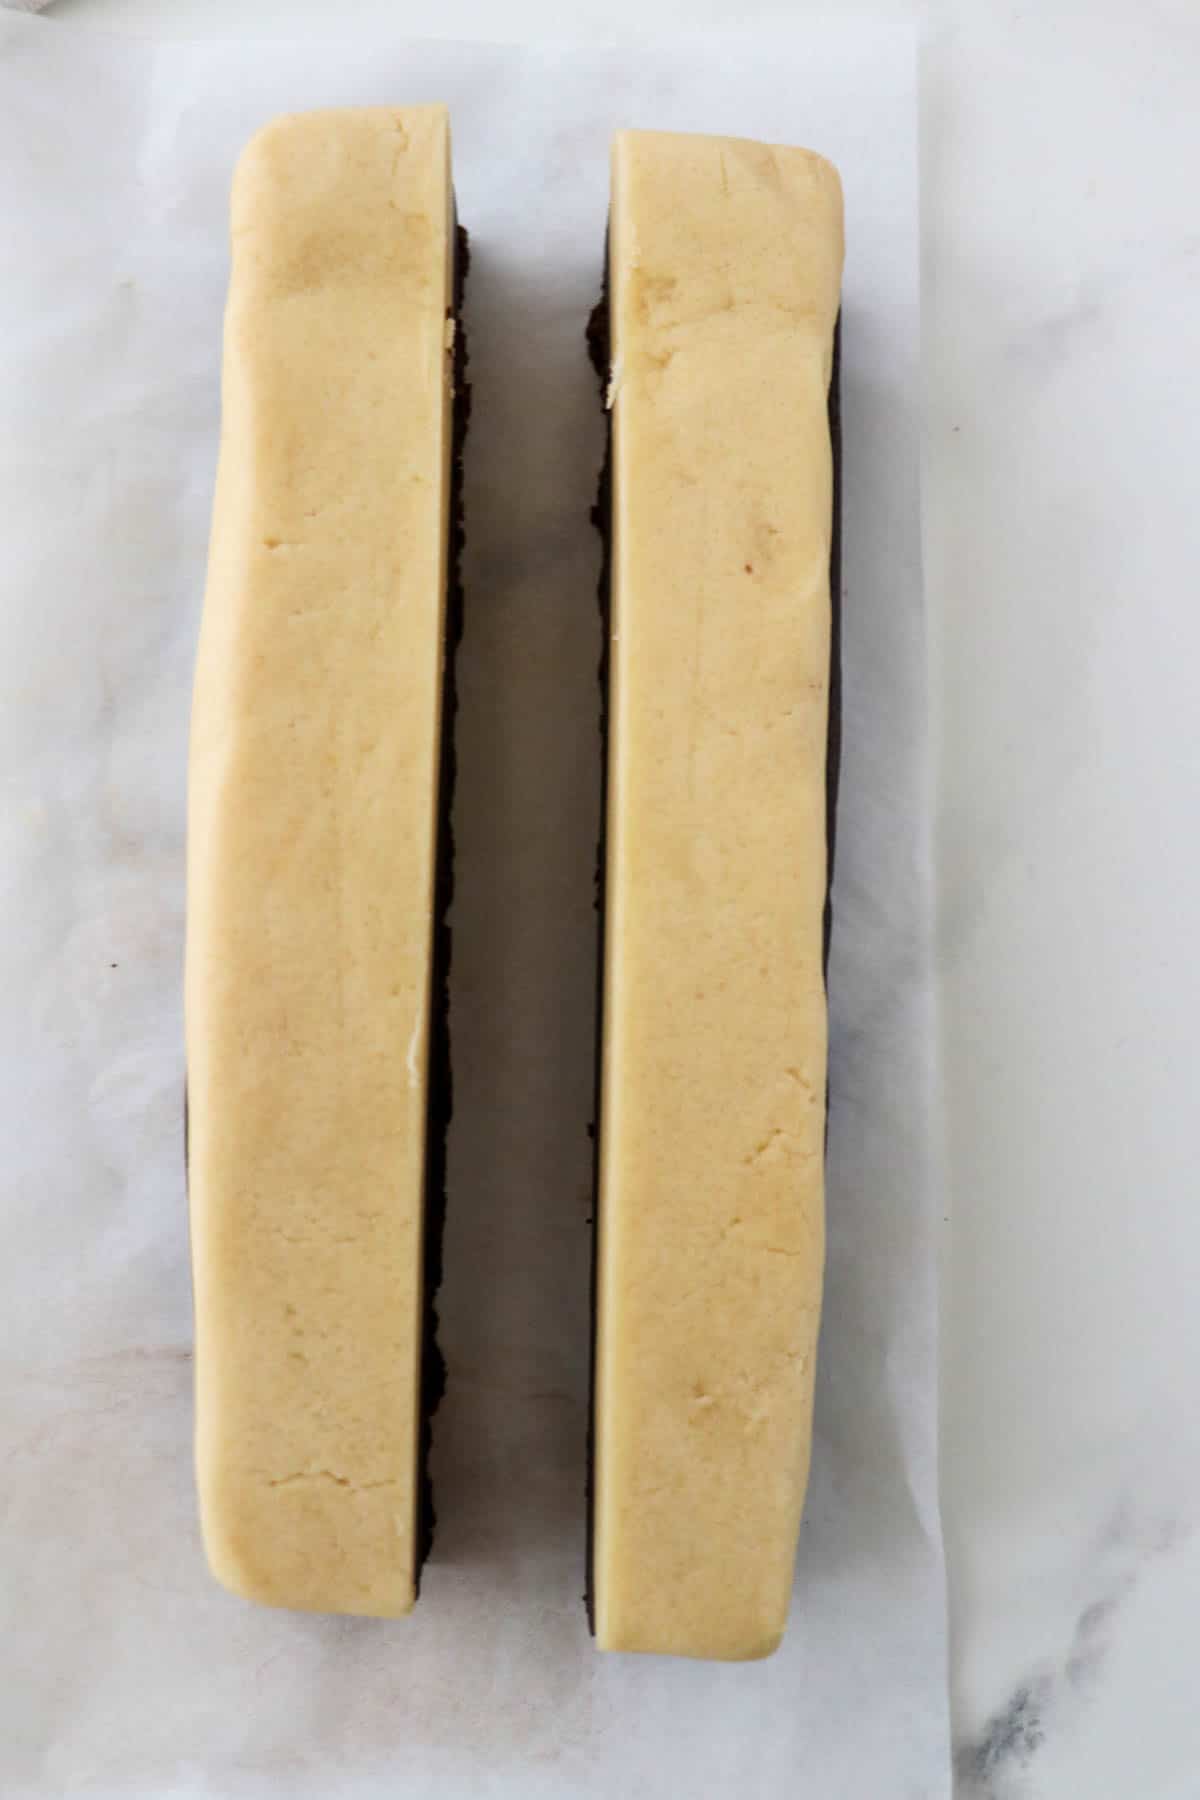 Rectangle of cookie dough cut in half lengthwise.